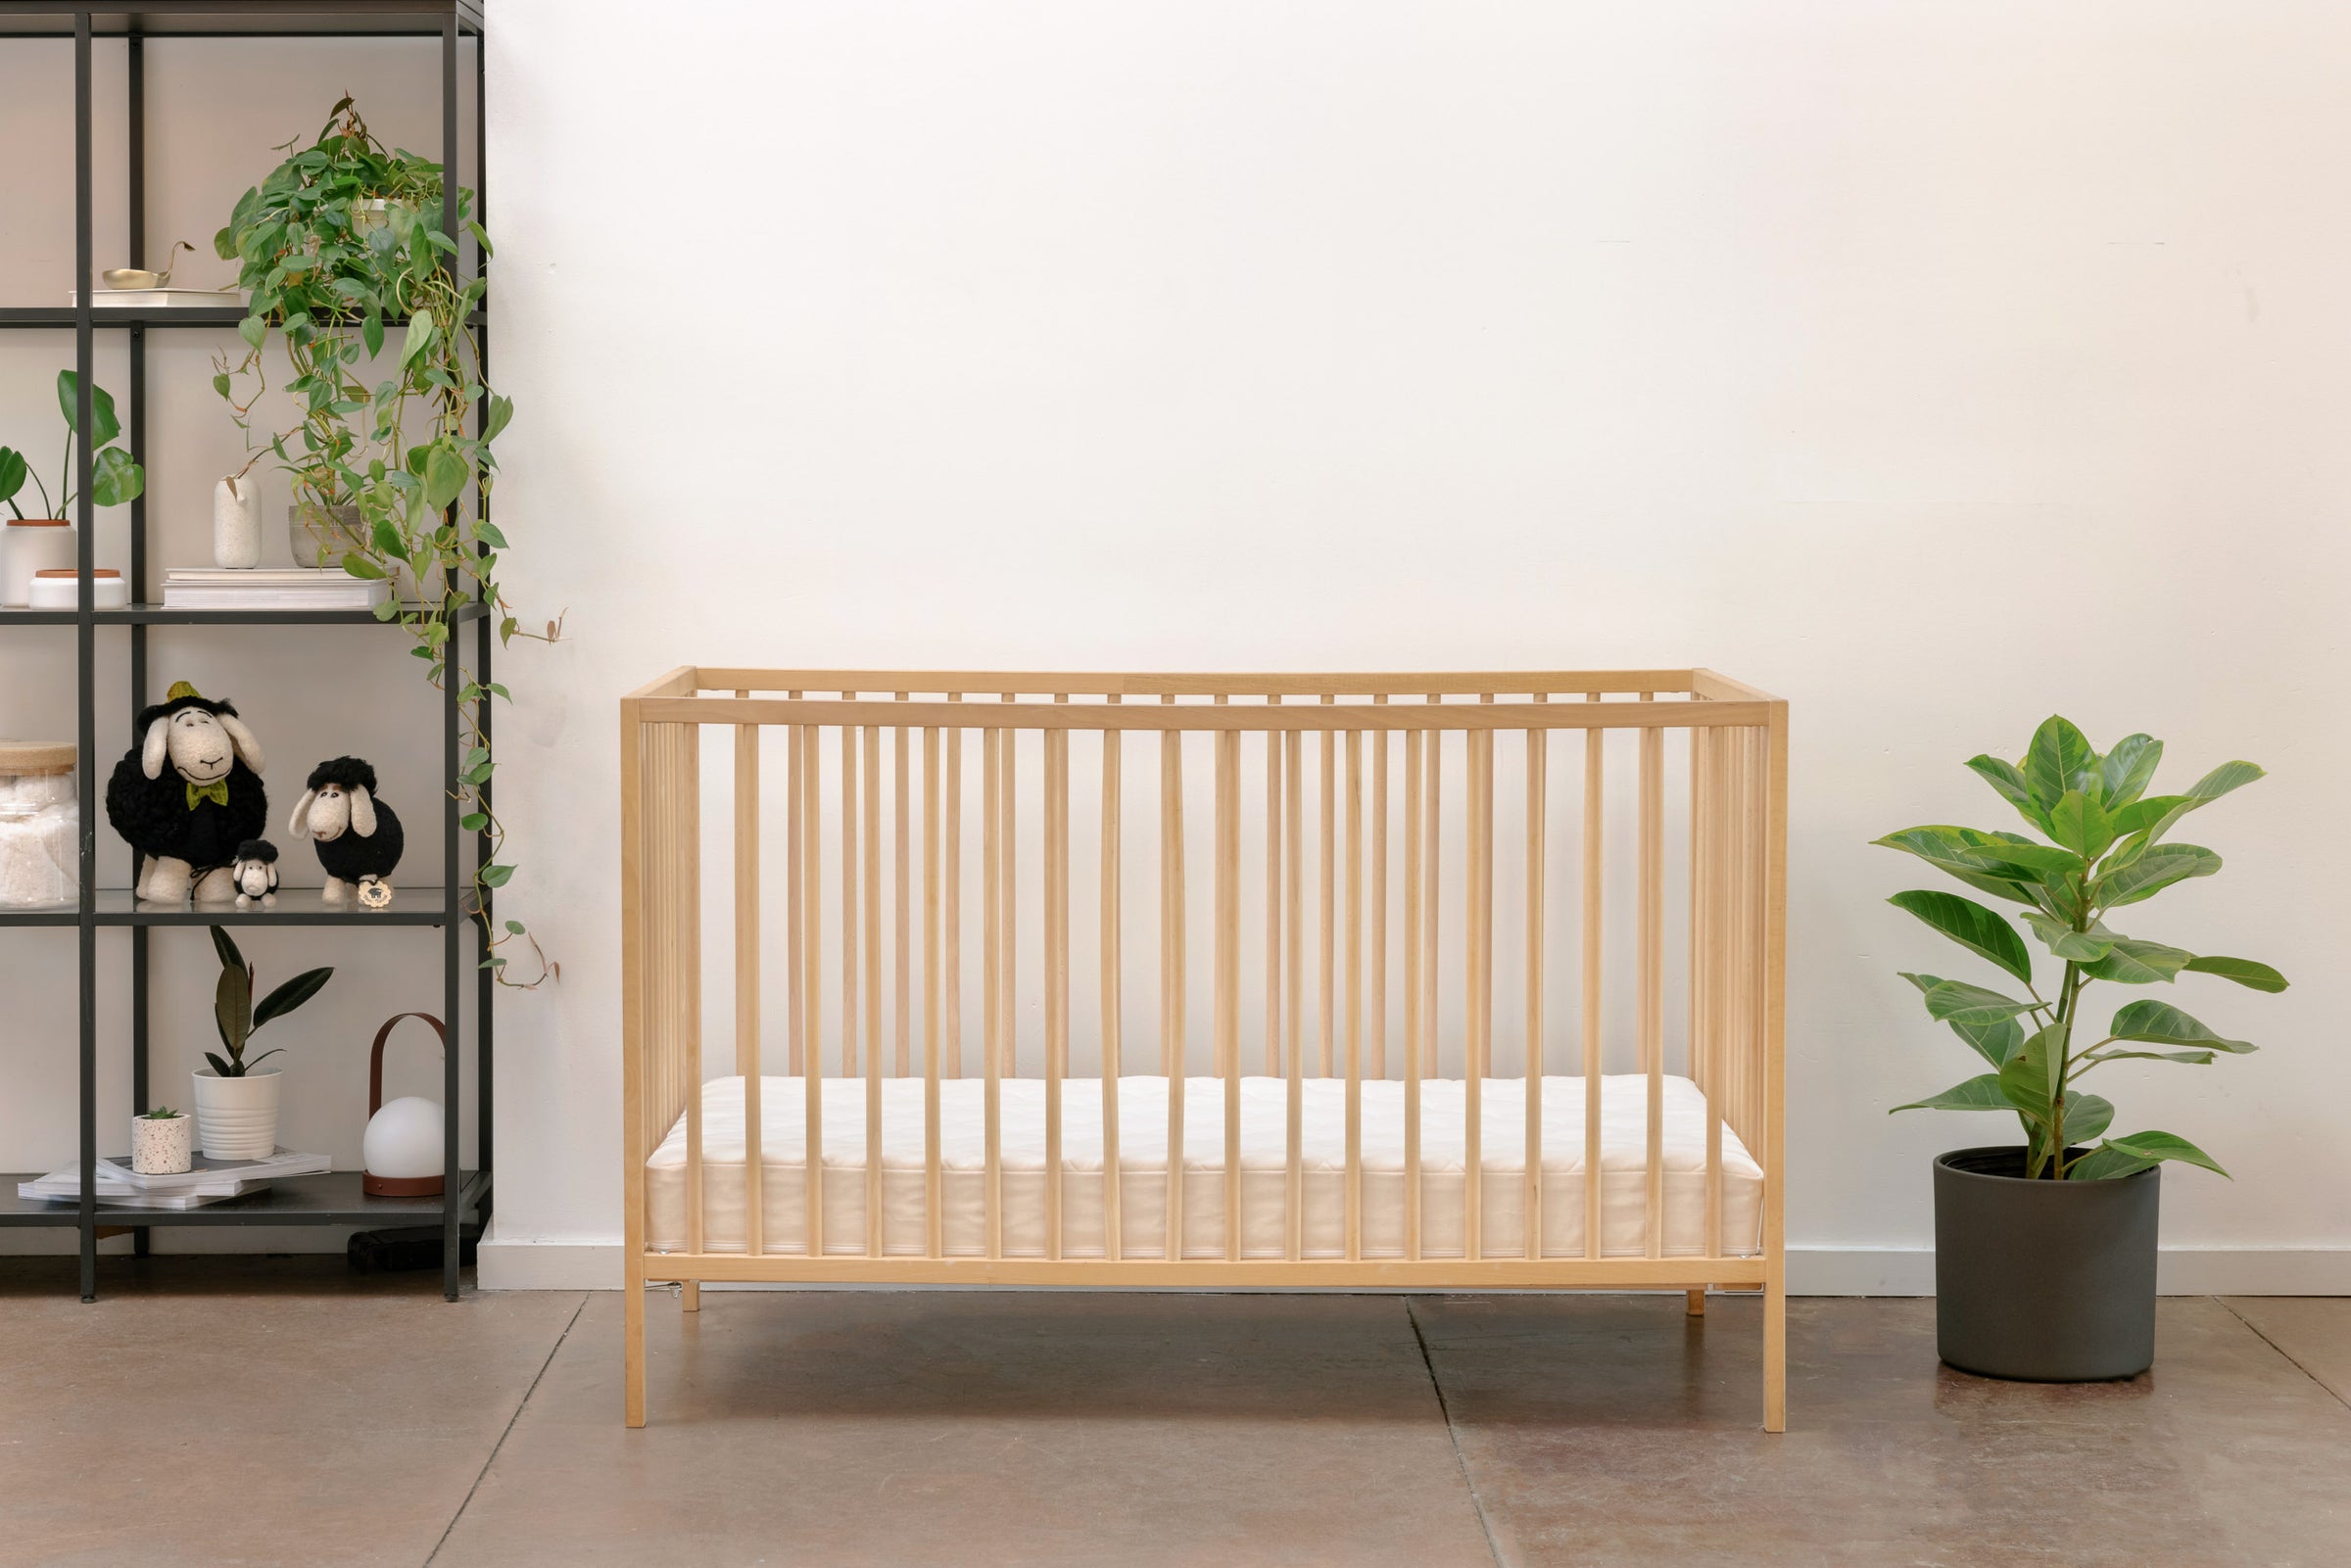 Crib with natural latex mattress inside. Natural decor like wool sheep toys on the side.